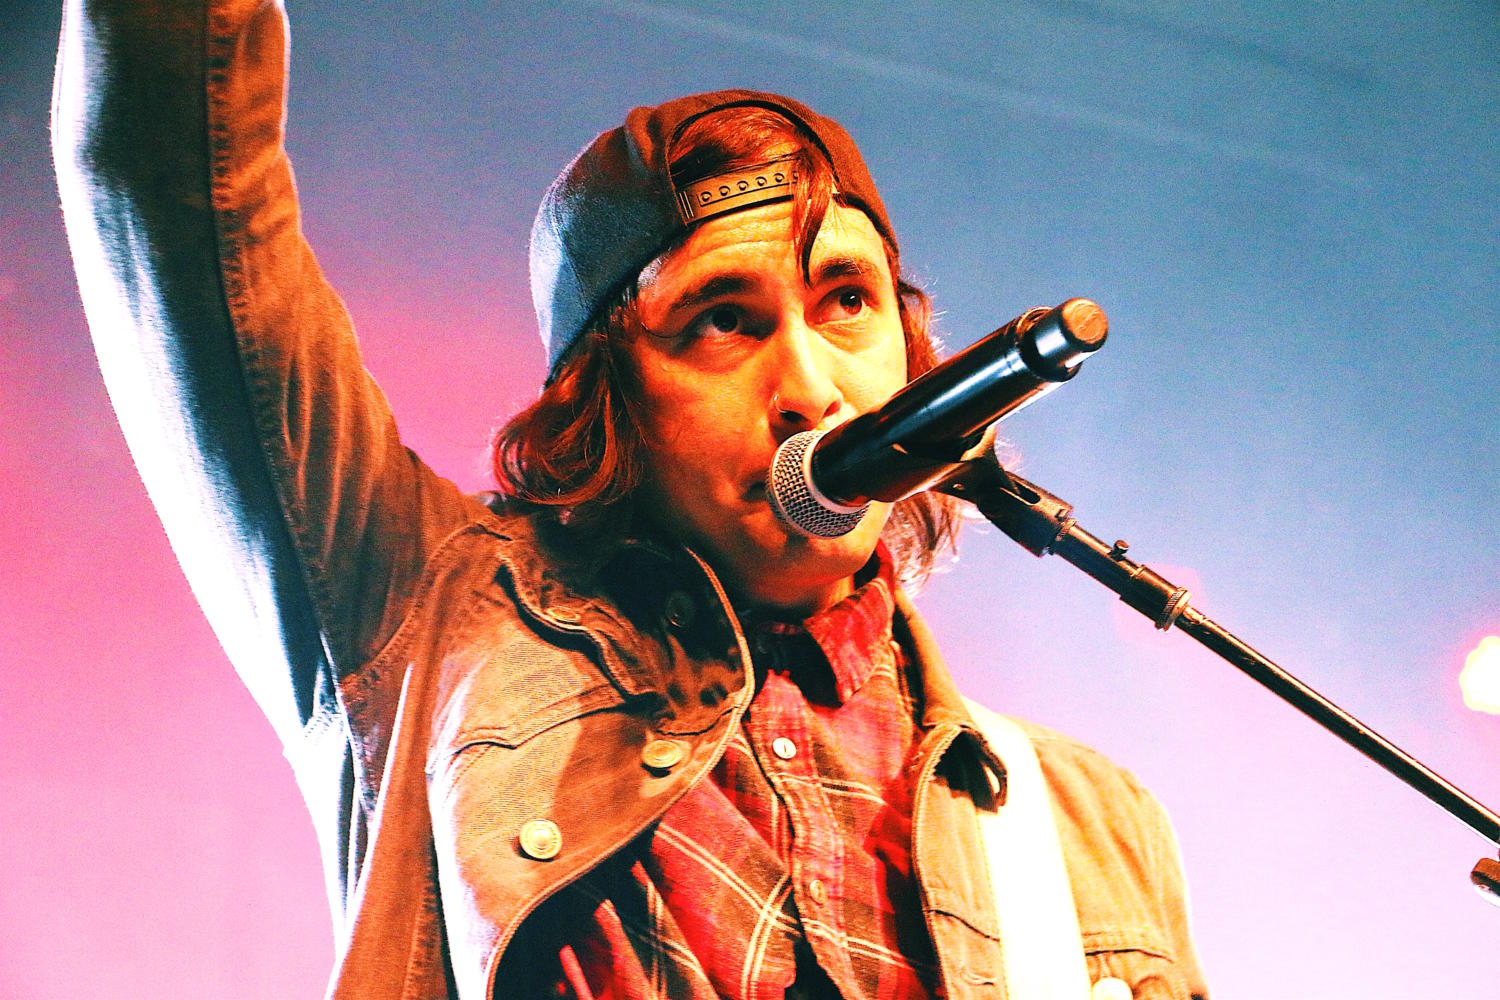 Vic Fuentes admires the support from the fans during Pierce the Veil’s show at Hampton Beach Casino Ballroom on May 17, 2017.	